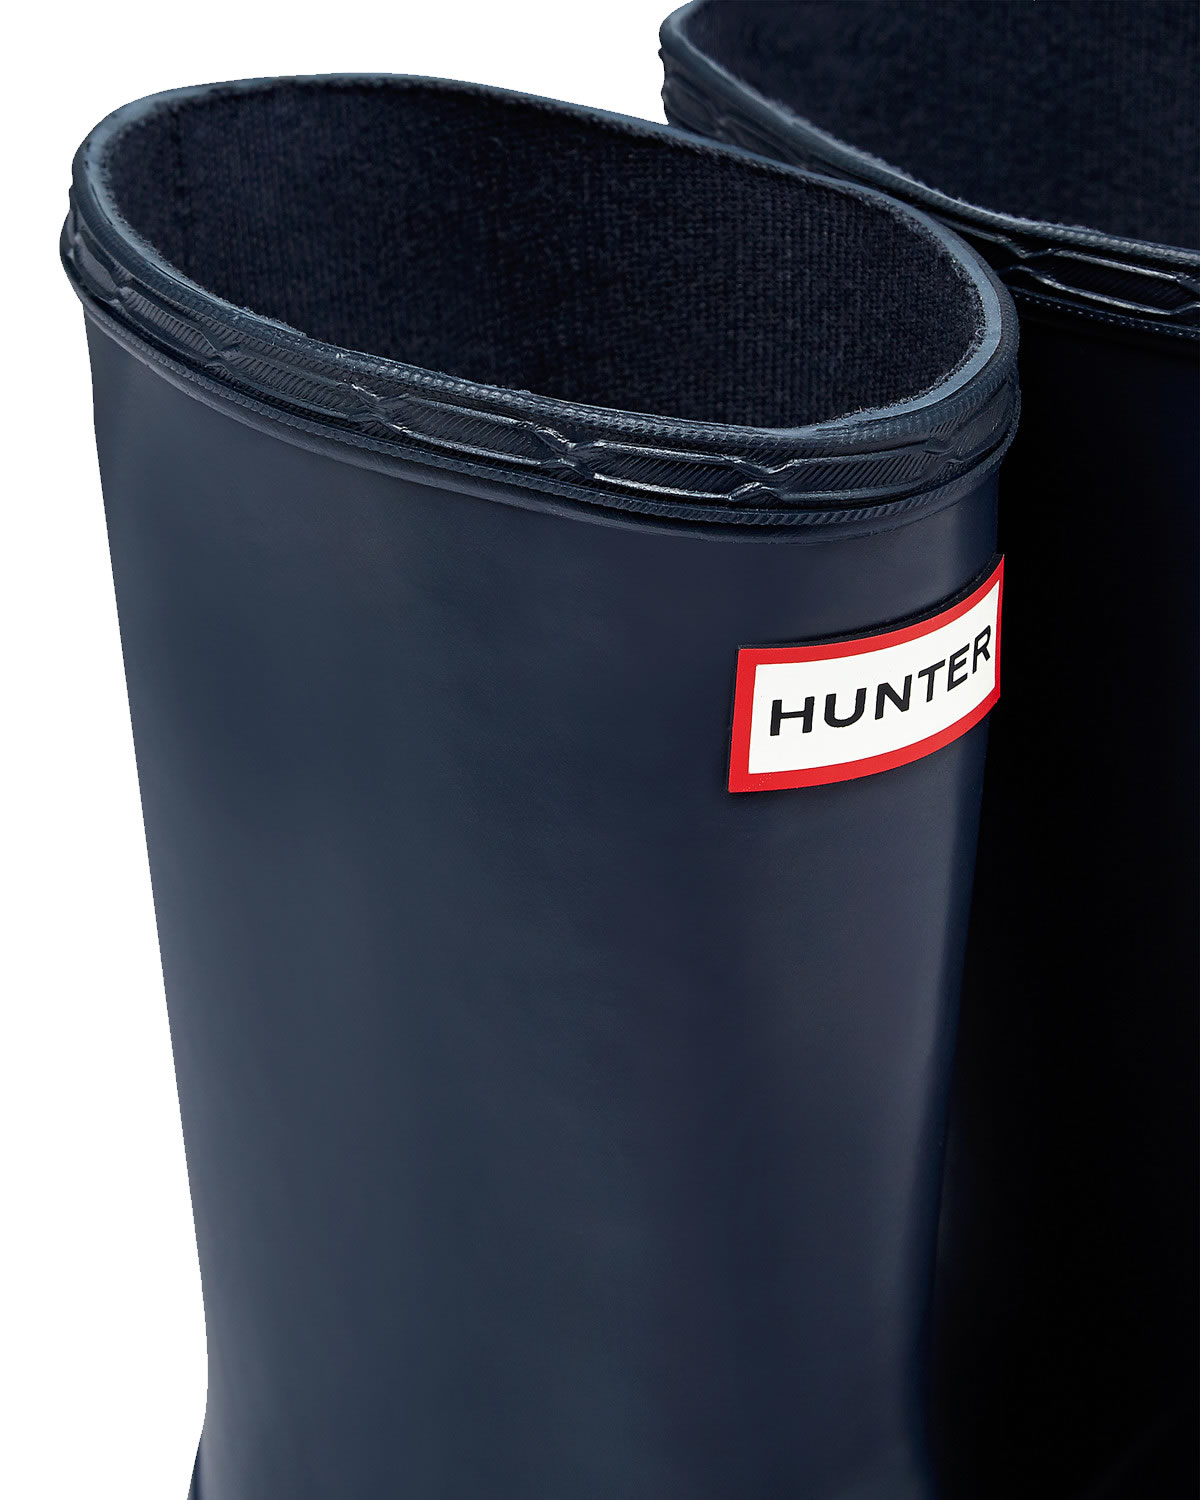 Extra image of Kids First Hunter Wellies - Navy UK 8 INF (EURO 25)